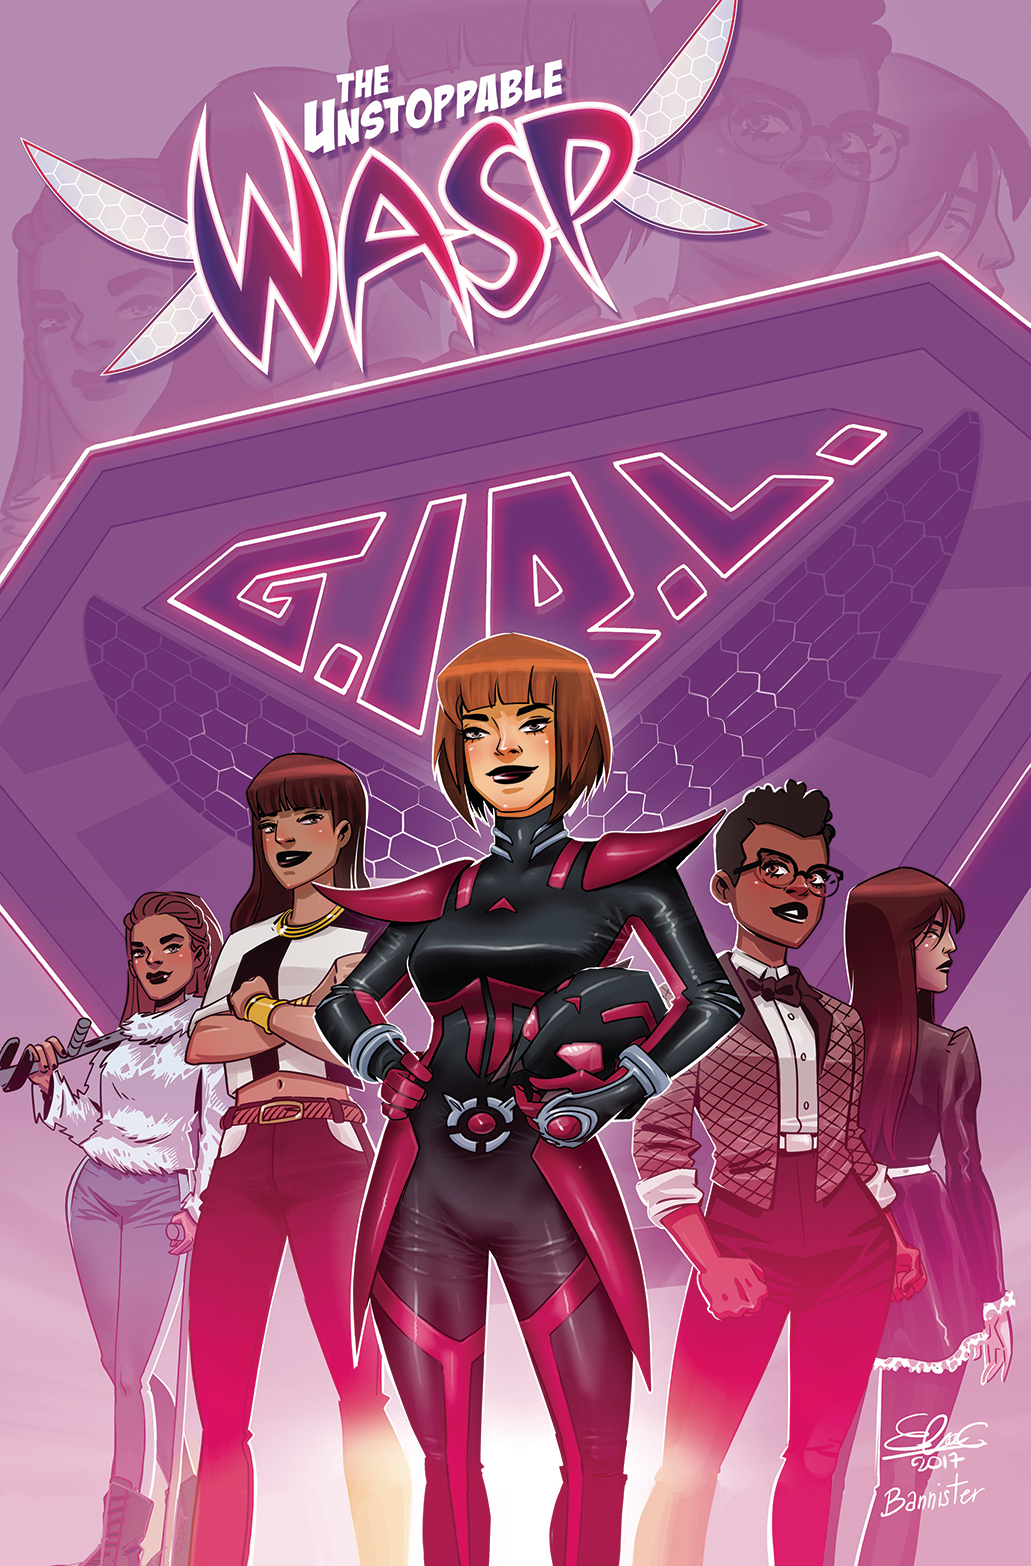 UNSTOPPABLE WASP #6